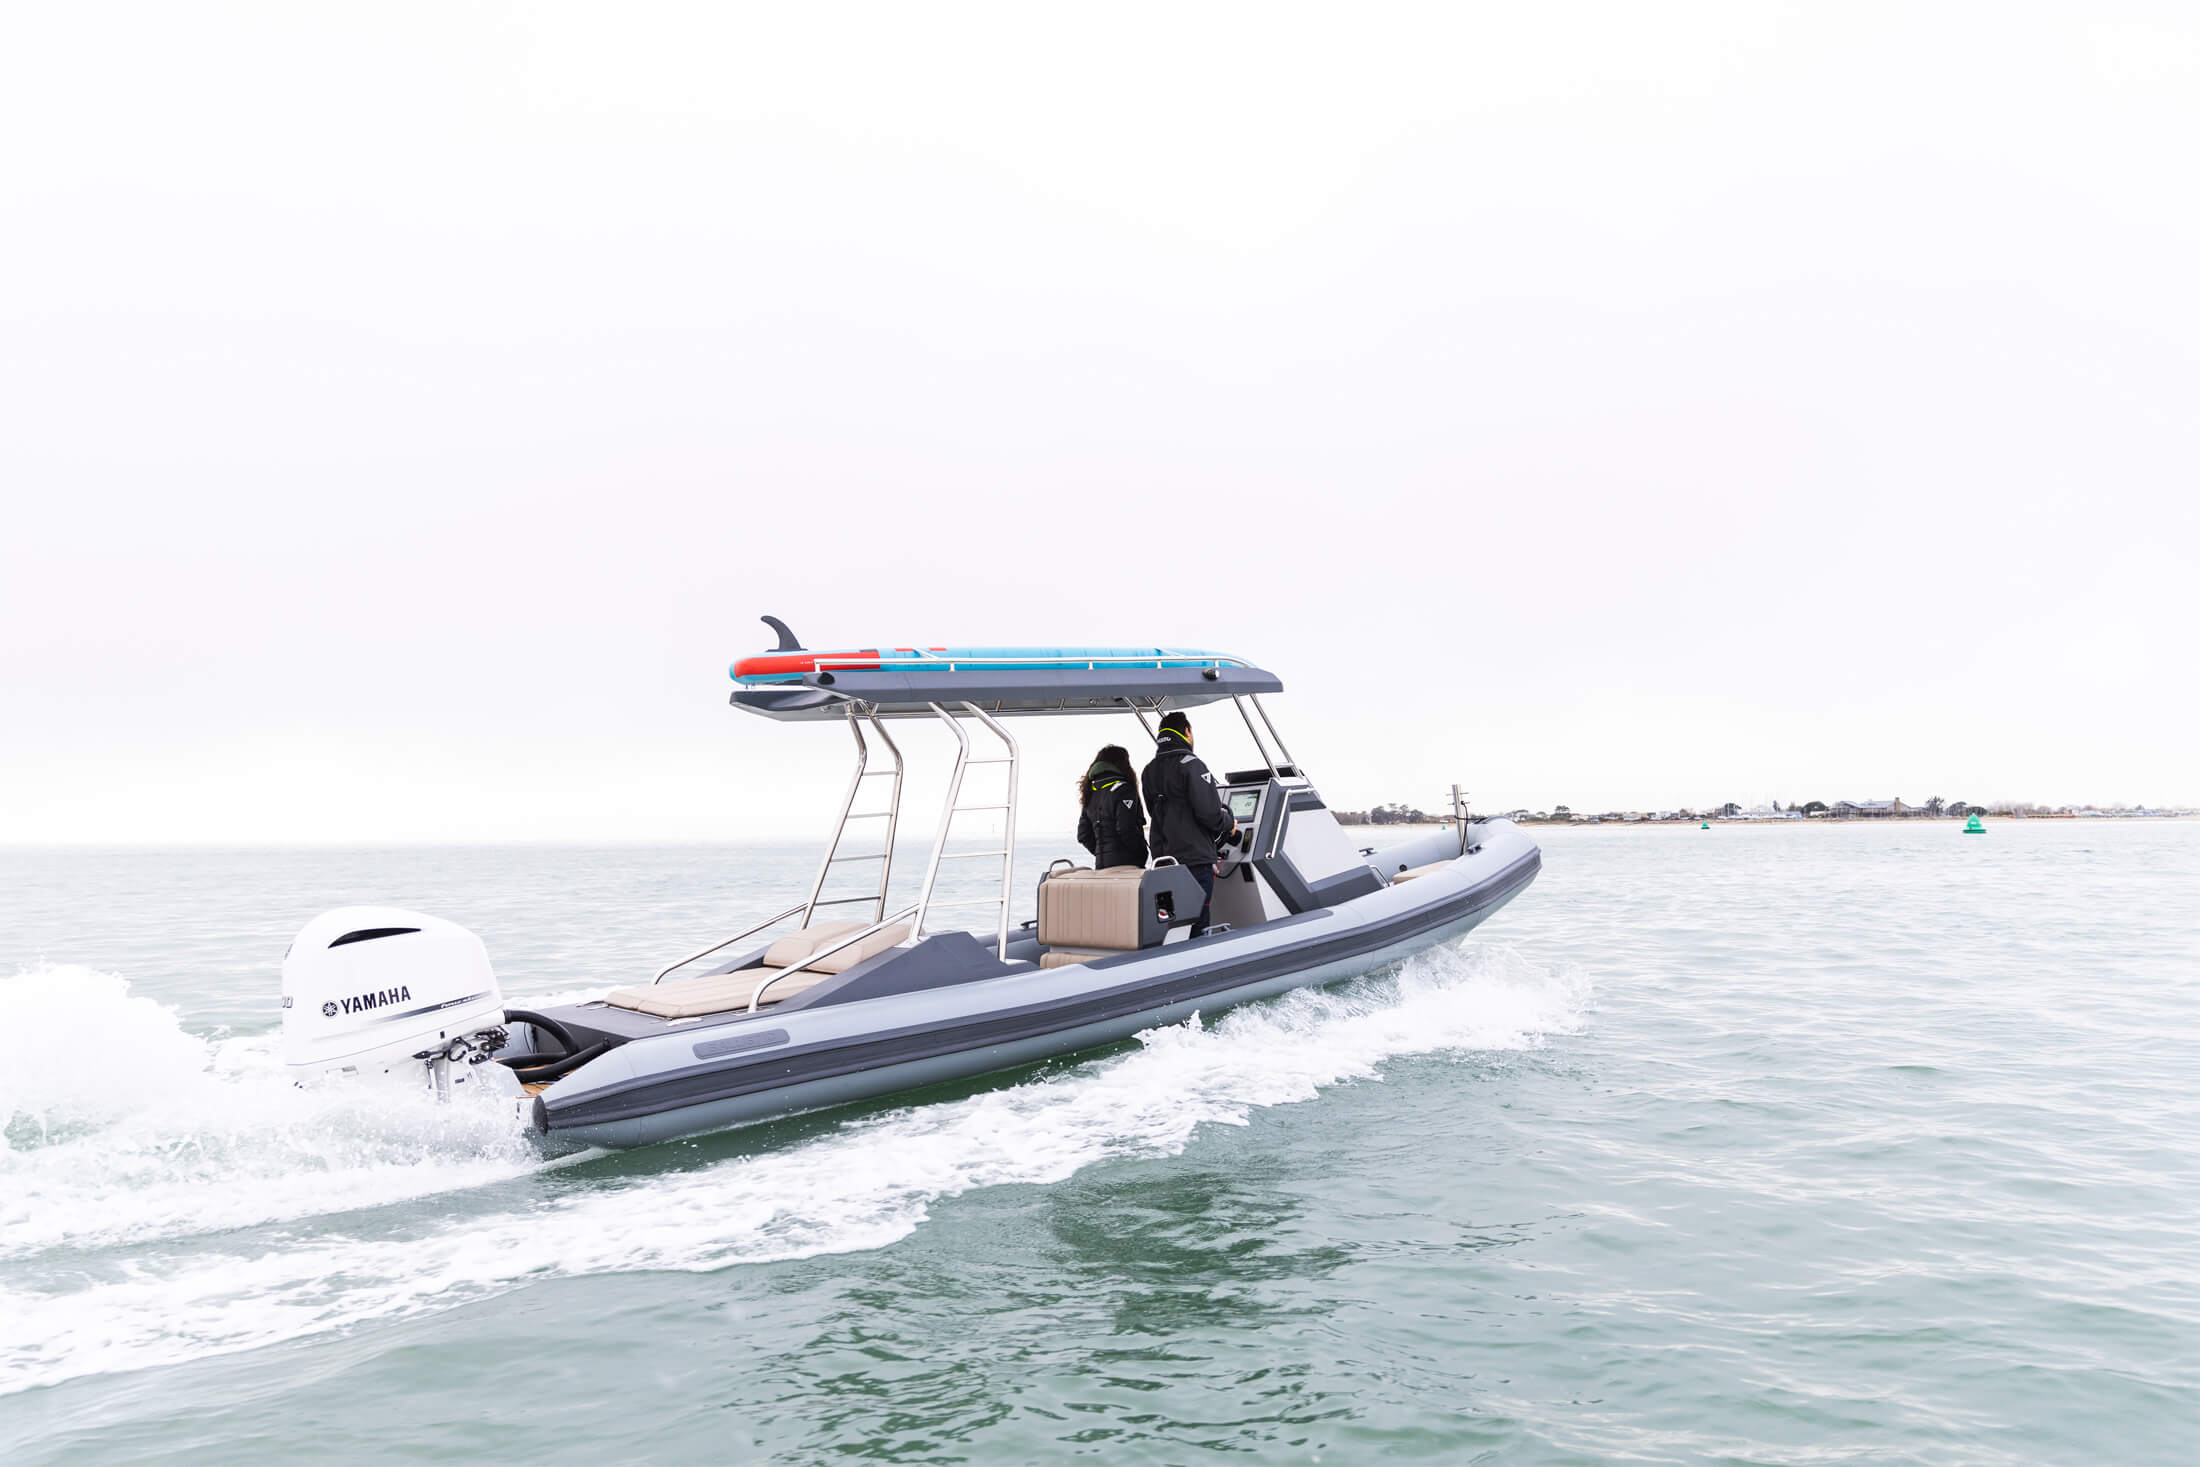 XP80 RIB on the water